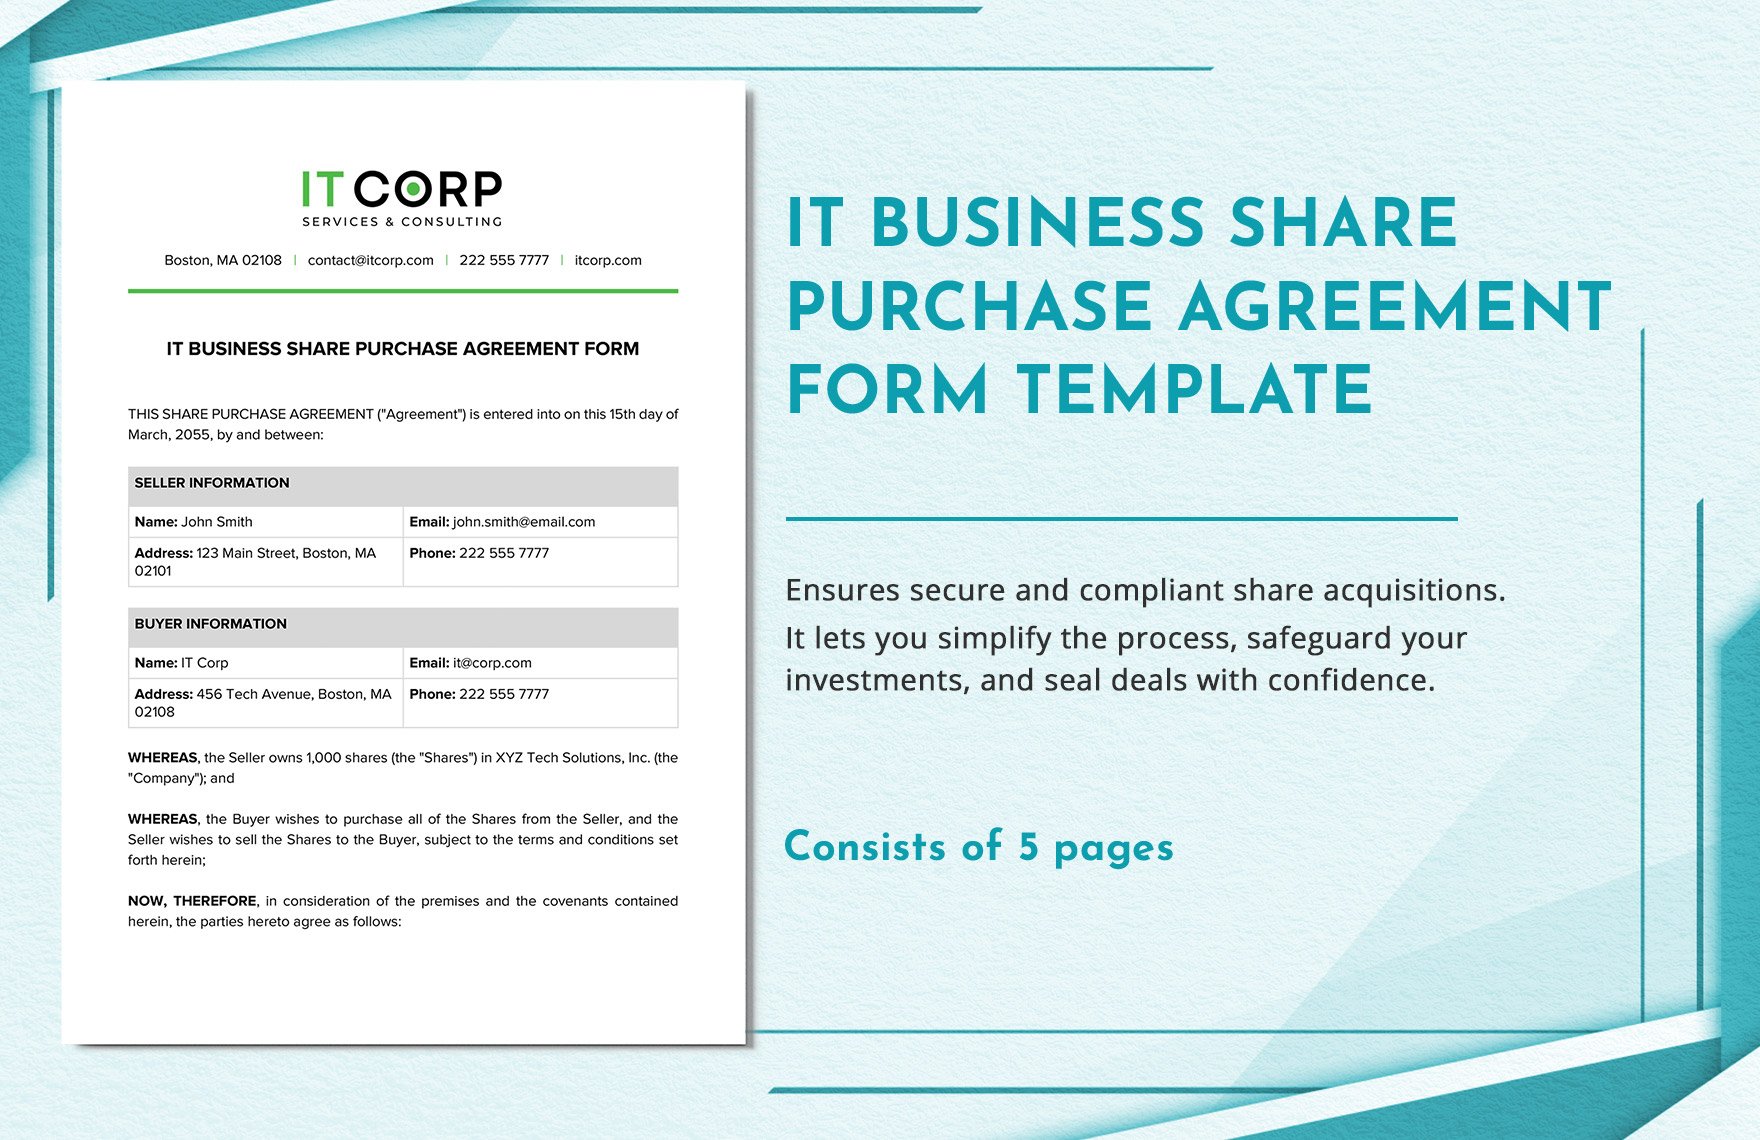 IT Business Share Purchase Agreement Form Template in Word, Google Docs, PDF